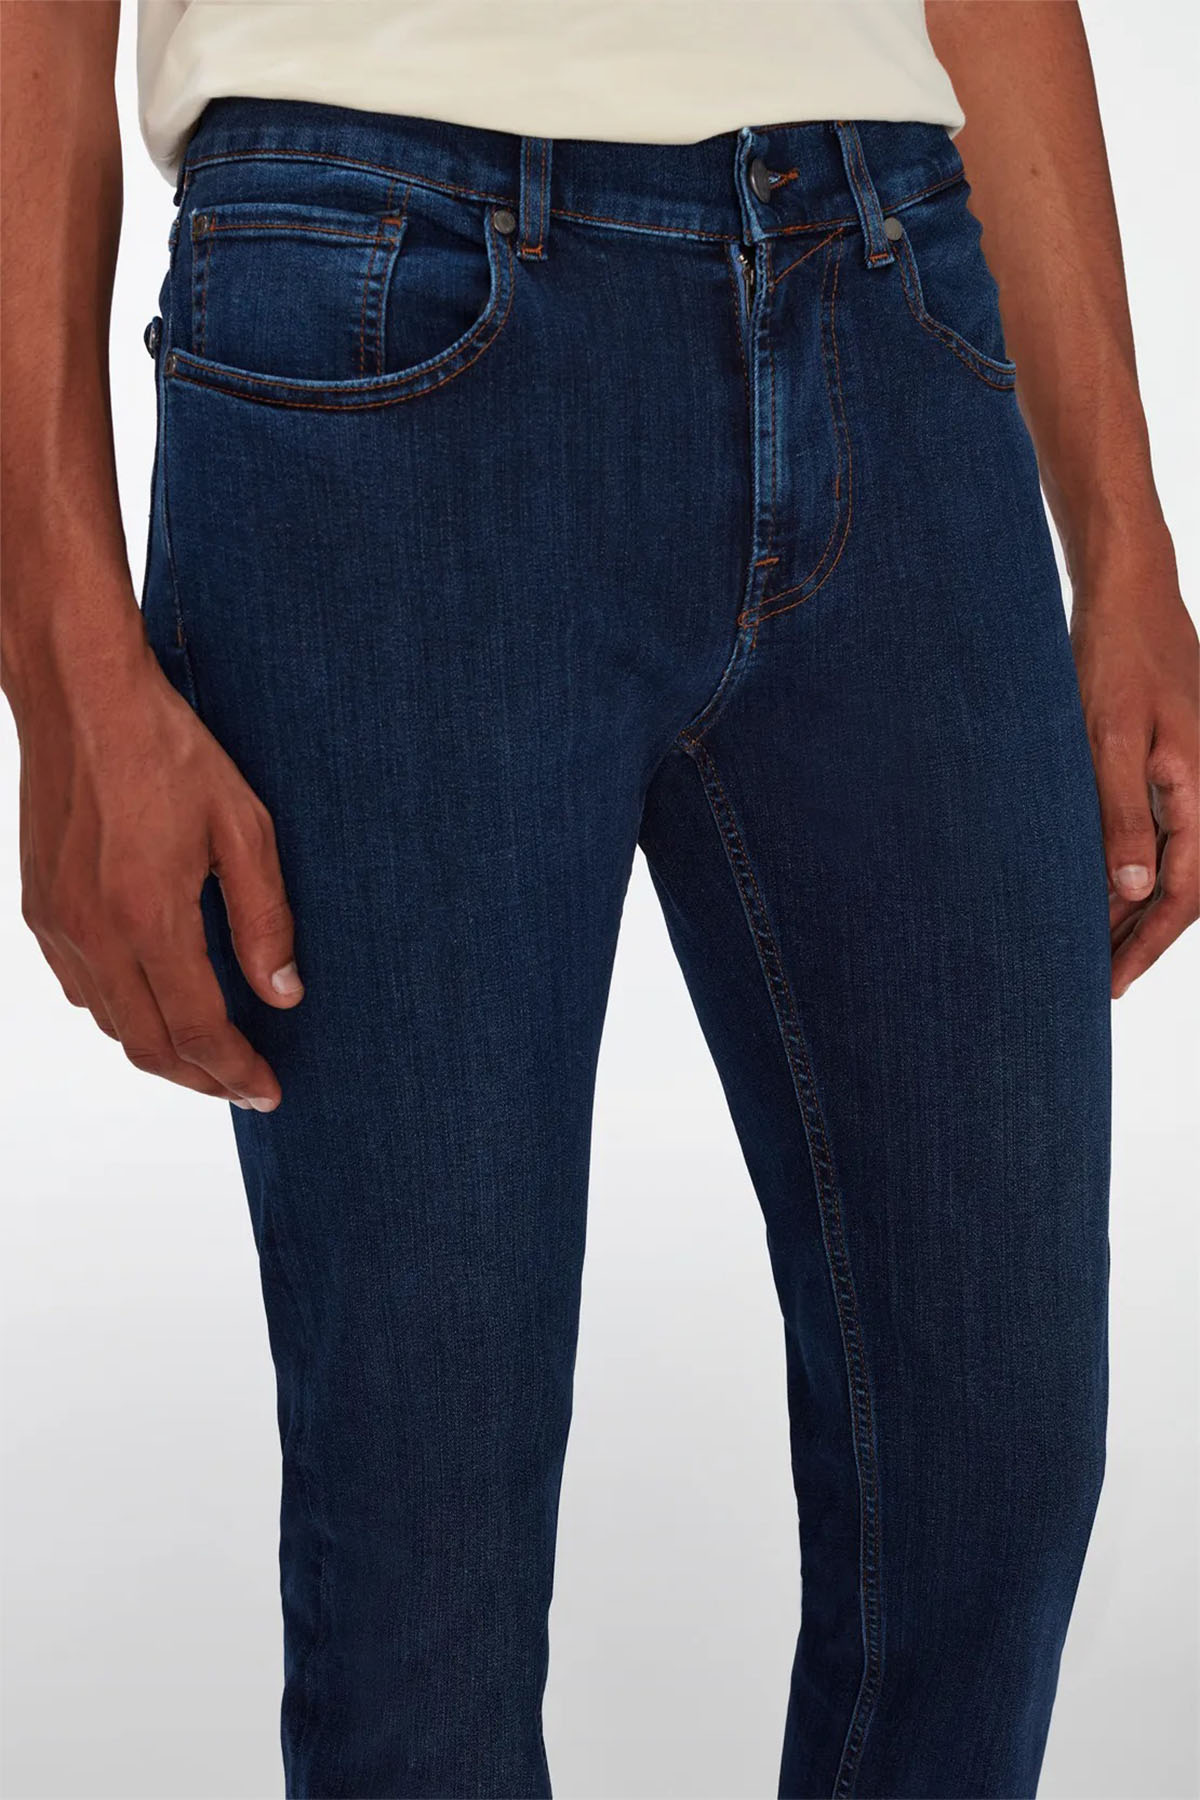 7 For All Mankind Slimmy Tapered Moden Slim Fit Jeans